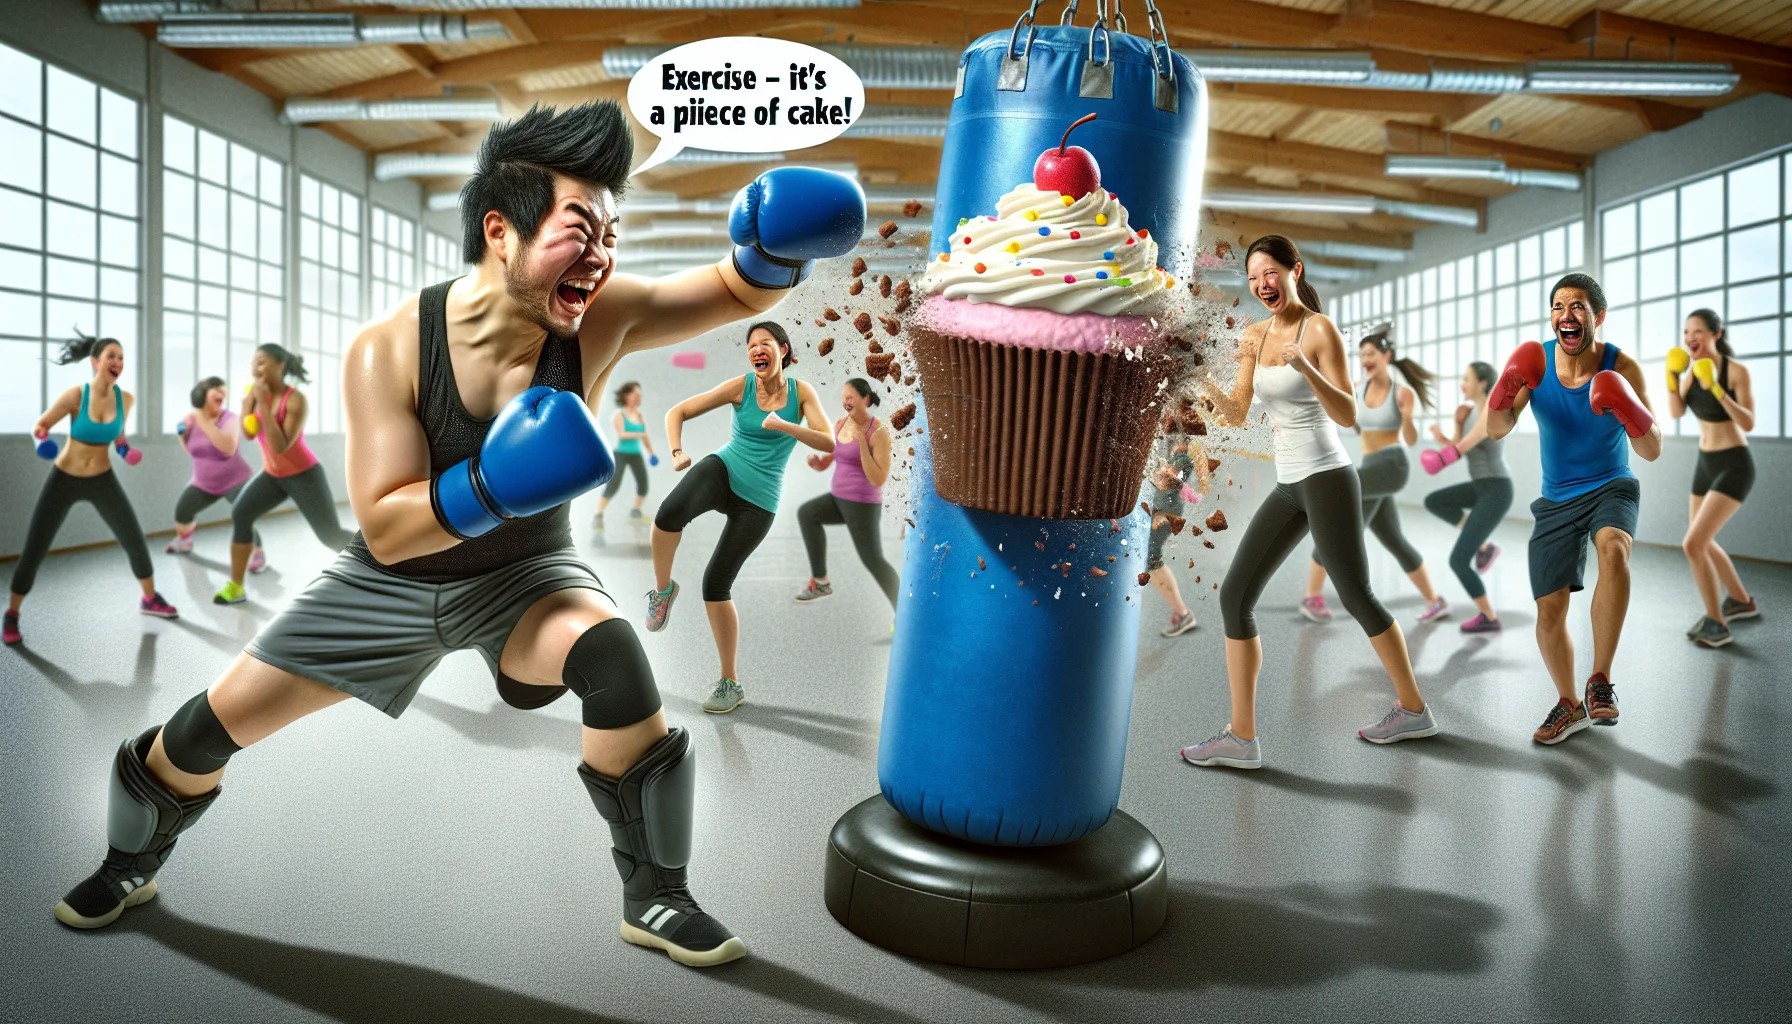 Create a humorous yet inspiring image of an Asian male kickboxing athlete, who we'll name 'Liu Ce'. We see him in a lively indoor gym, taking a vigorous stance, wearing protective gloves and sports attire. His face shows determination mixed with a playful grin. In the hilarious twist, instead of a punch bag, he appears to be fighting against a life-sized cupcake, splattering bits of frosting as punches land. The background has people of different genders and descents, all laughing, motivated, and engaging in various fitness activities. A caption floating above reads, 'Exercise - it's a piece of cake!'